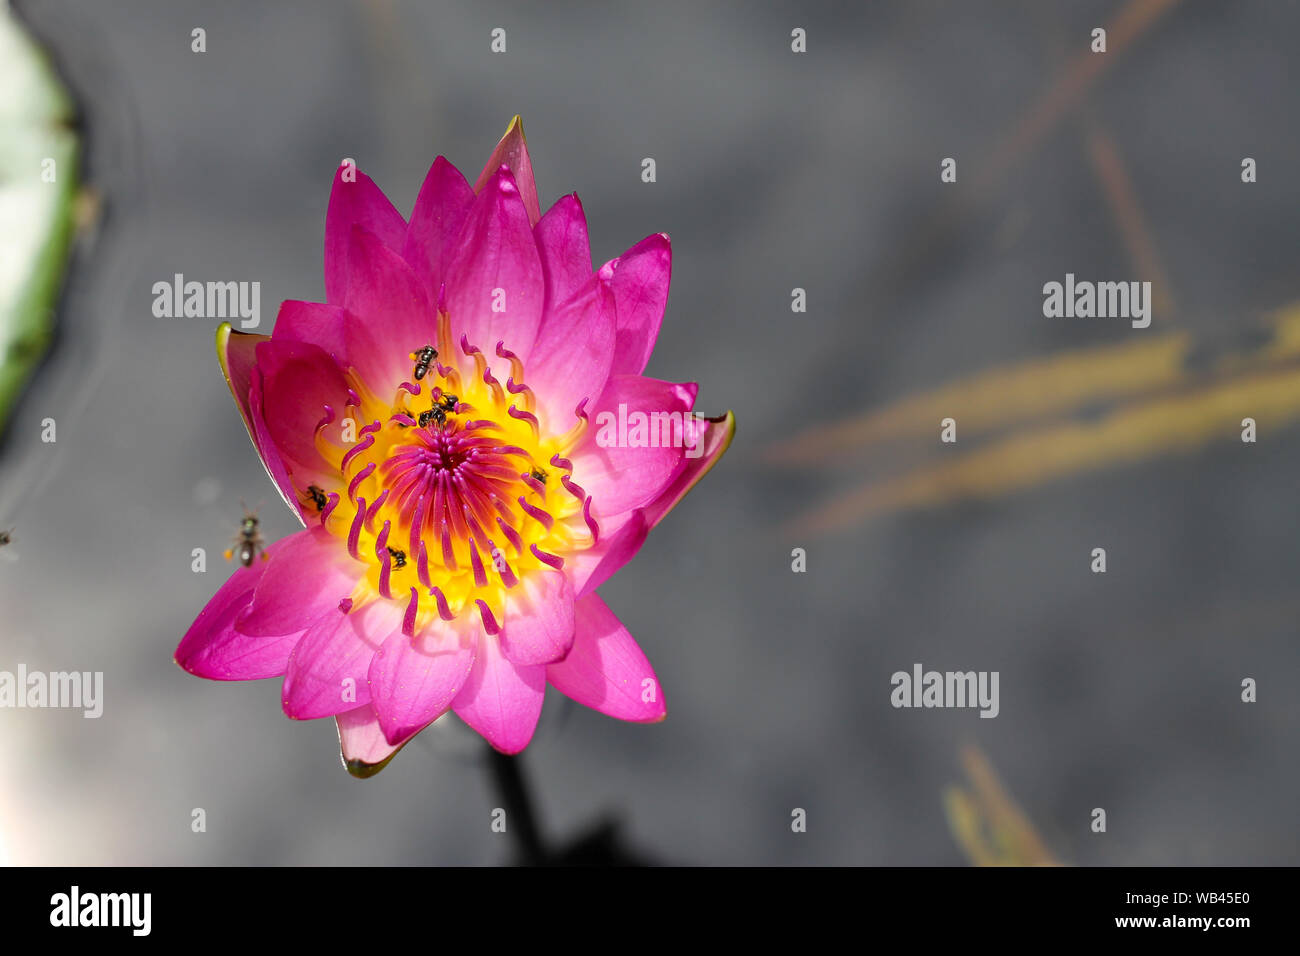 Beautiful pink water lily or lotus flower Perry's Orange Sunset. Nymphaea is reflected in the water. Soft blurred background of dark leaves from an ol Stock Photo